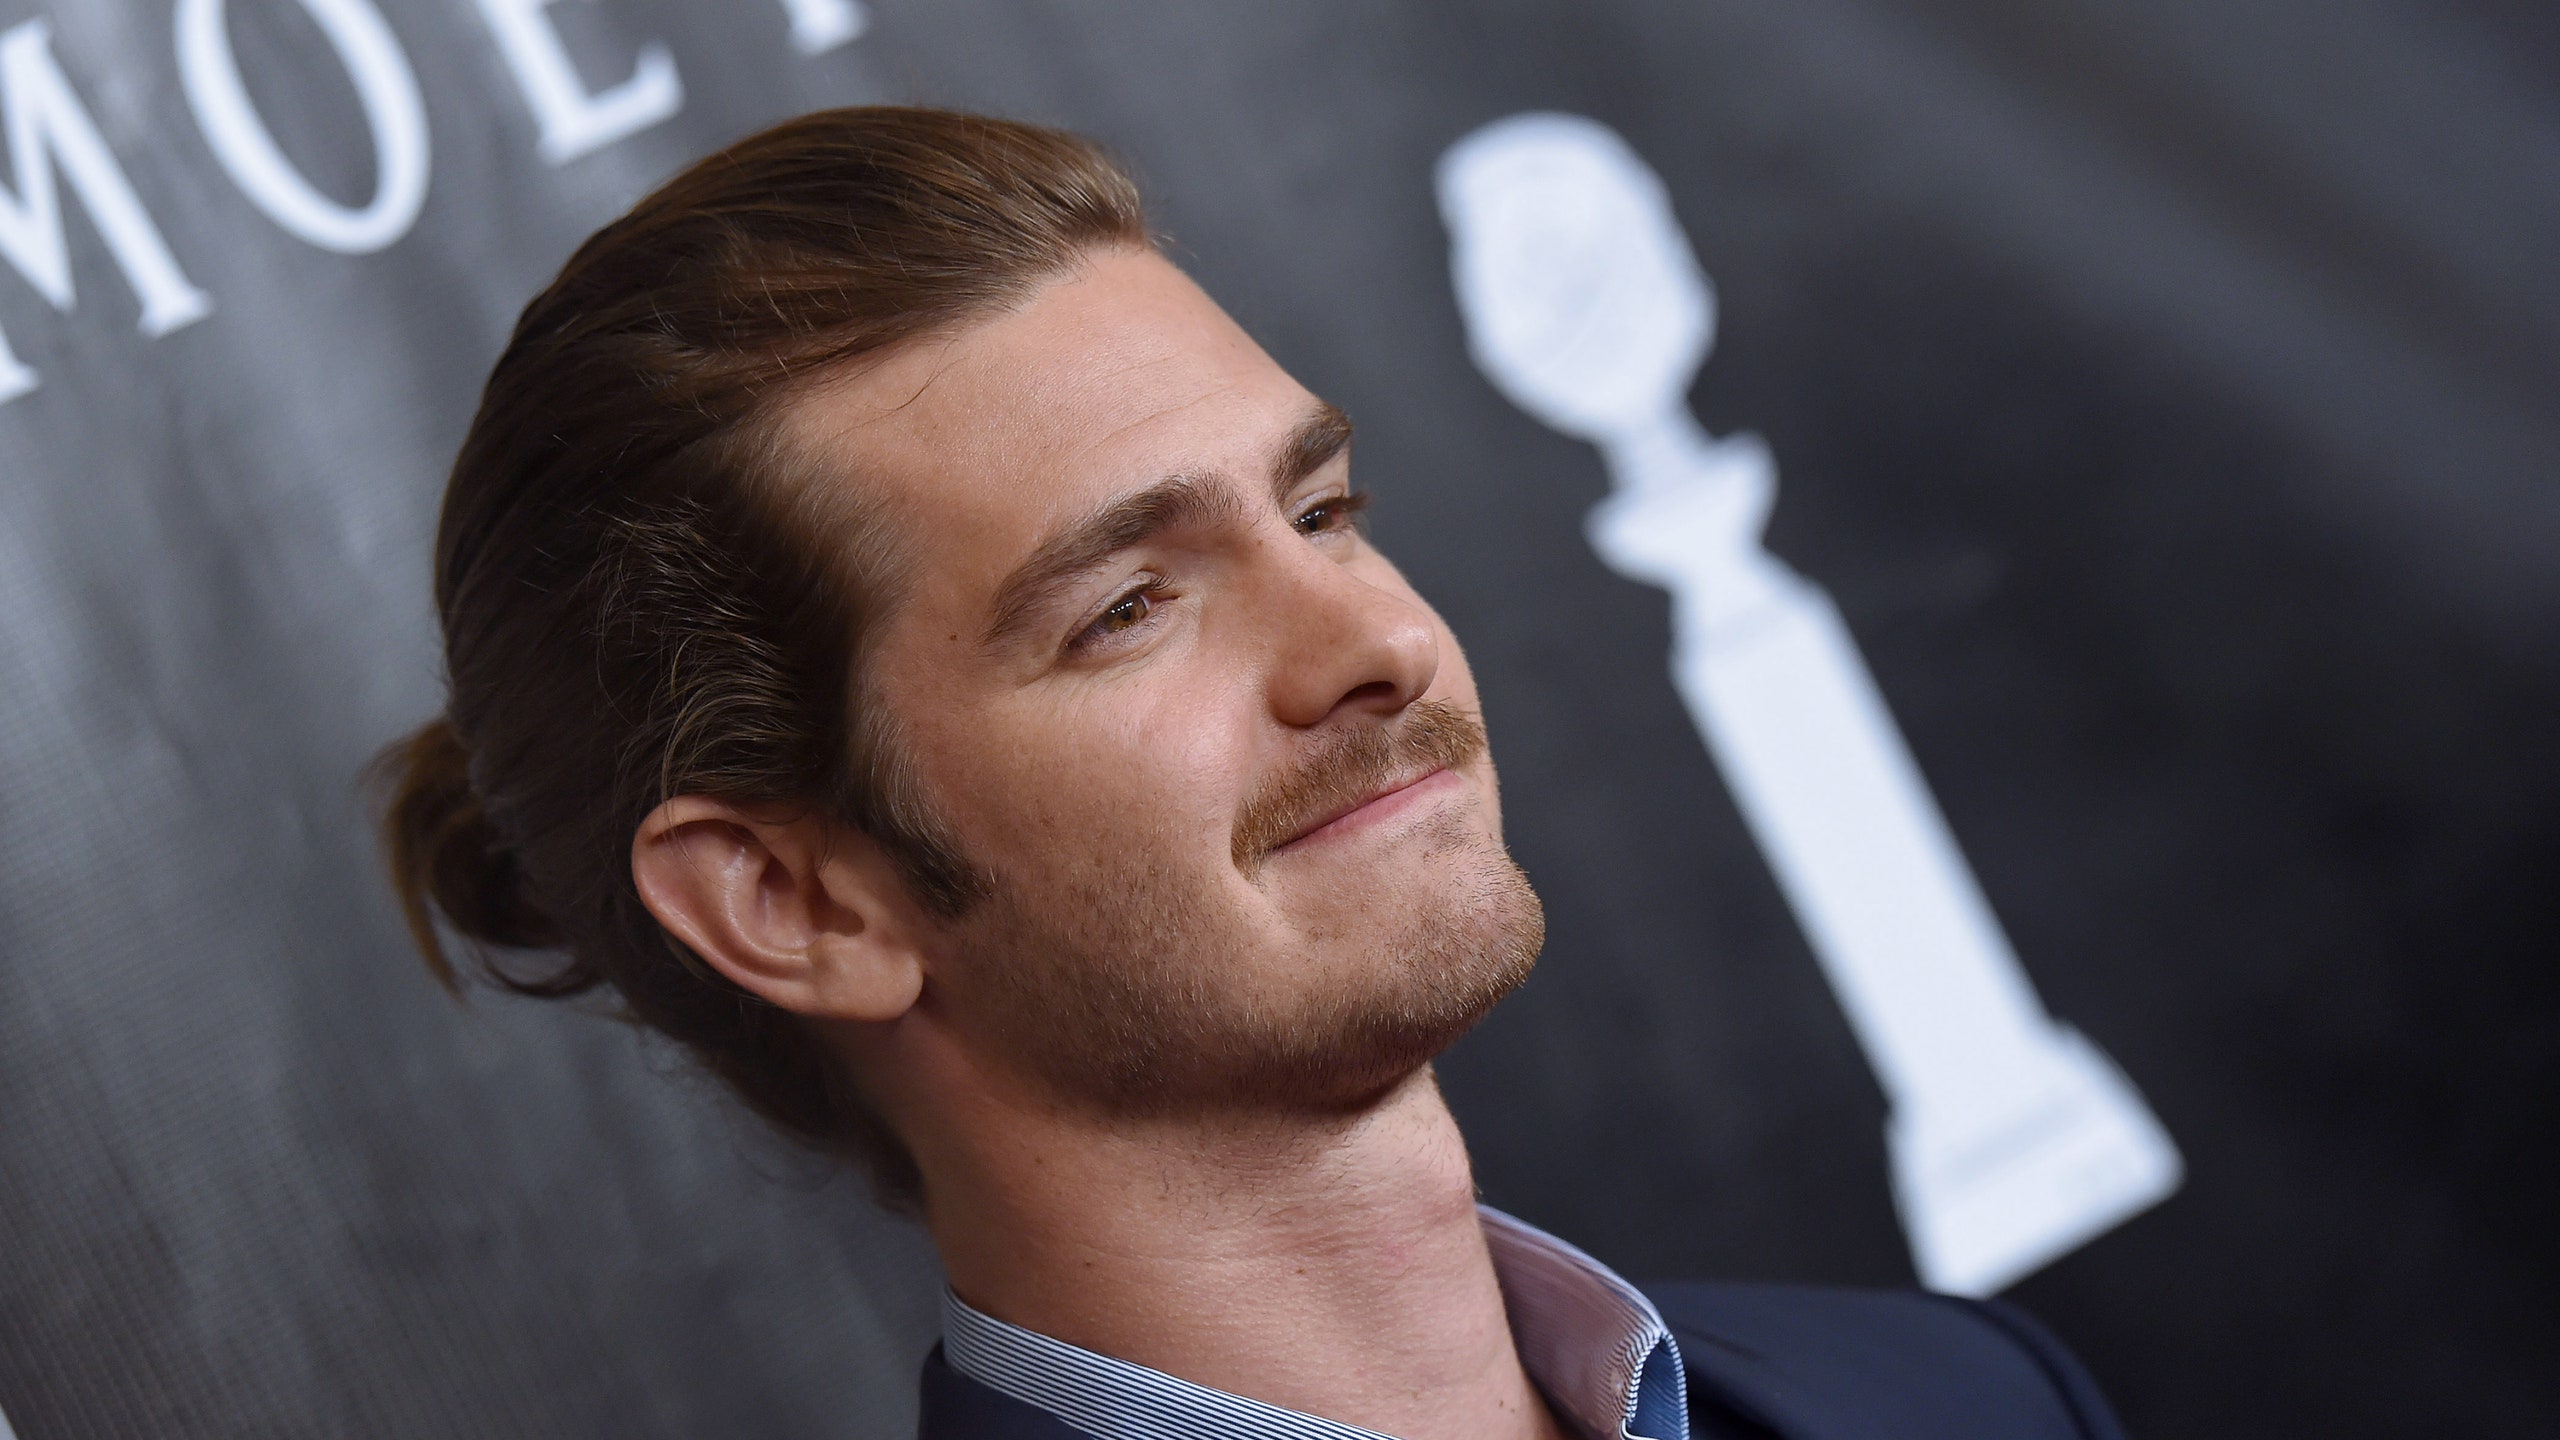 Andrew Garfield Age, Career, and Personal Life